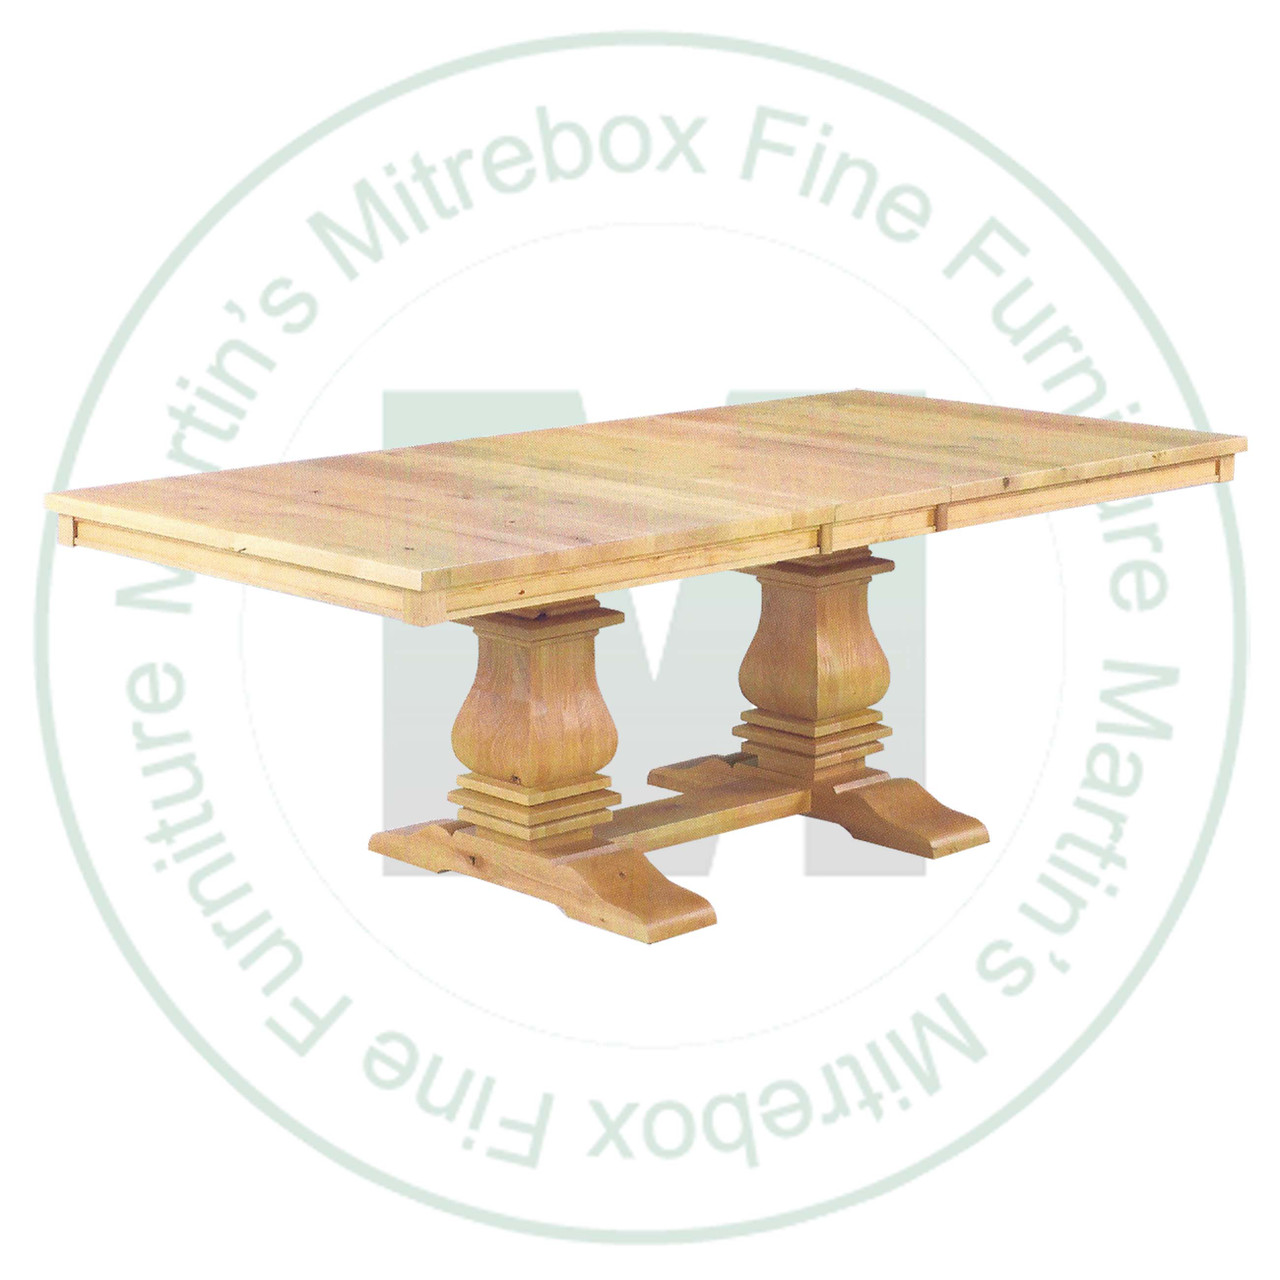 Oak Mediterranean Solid Top Pedestal Table 48''D x 72''W x 30''H And 2 - 16'' Extensions. Table Has 1.25'' Thick Top